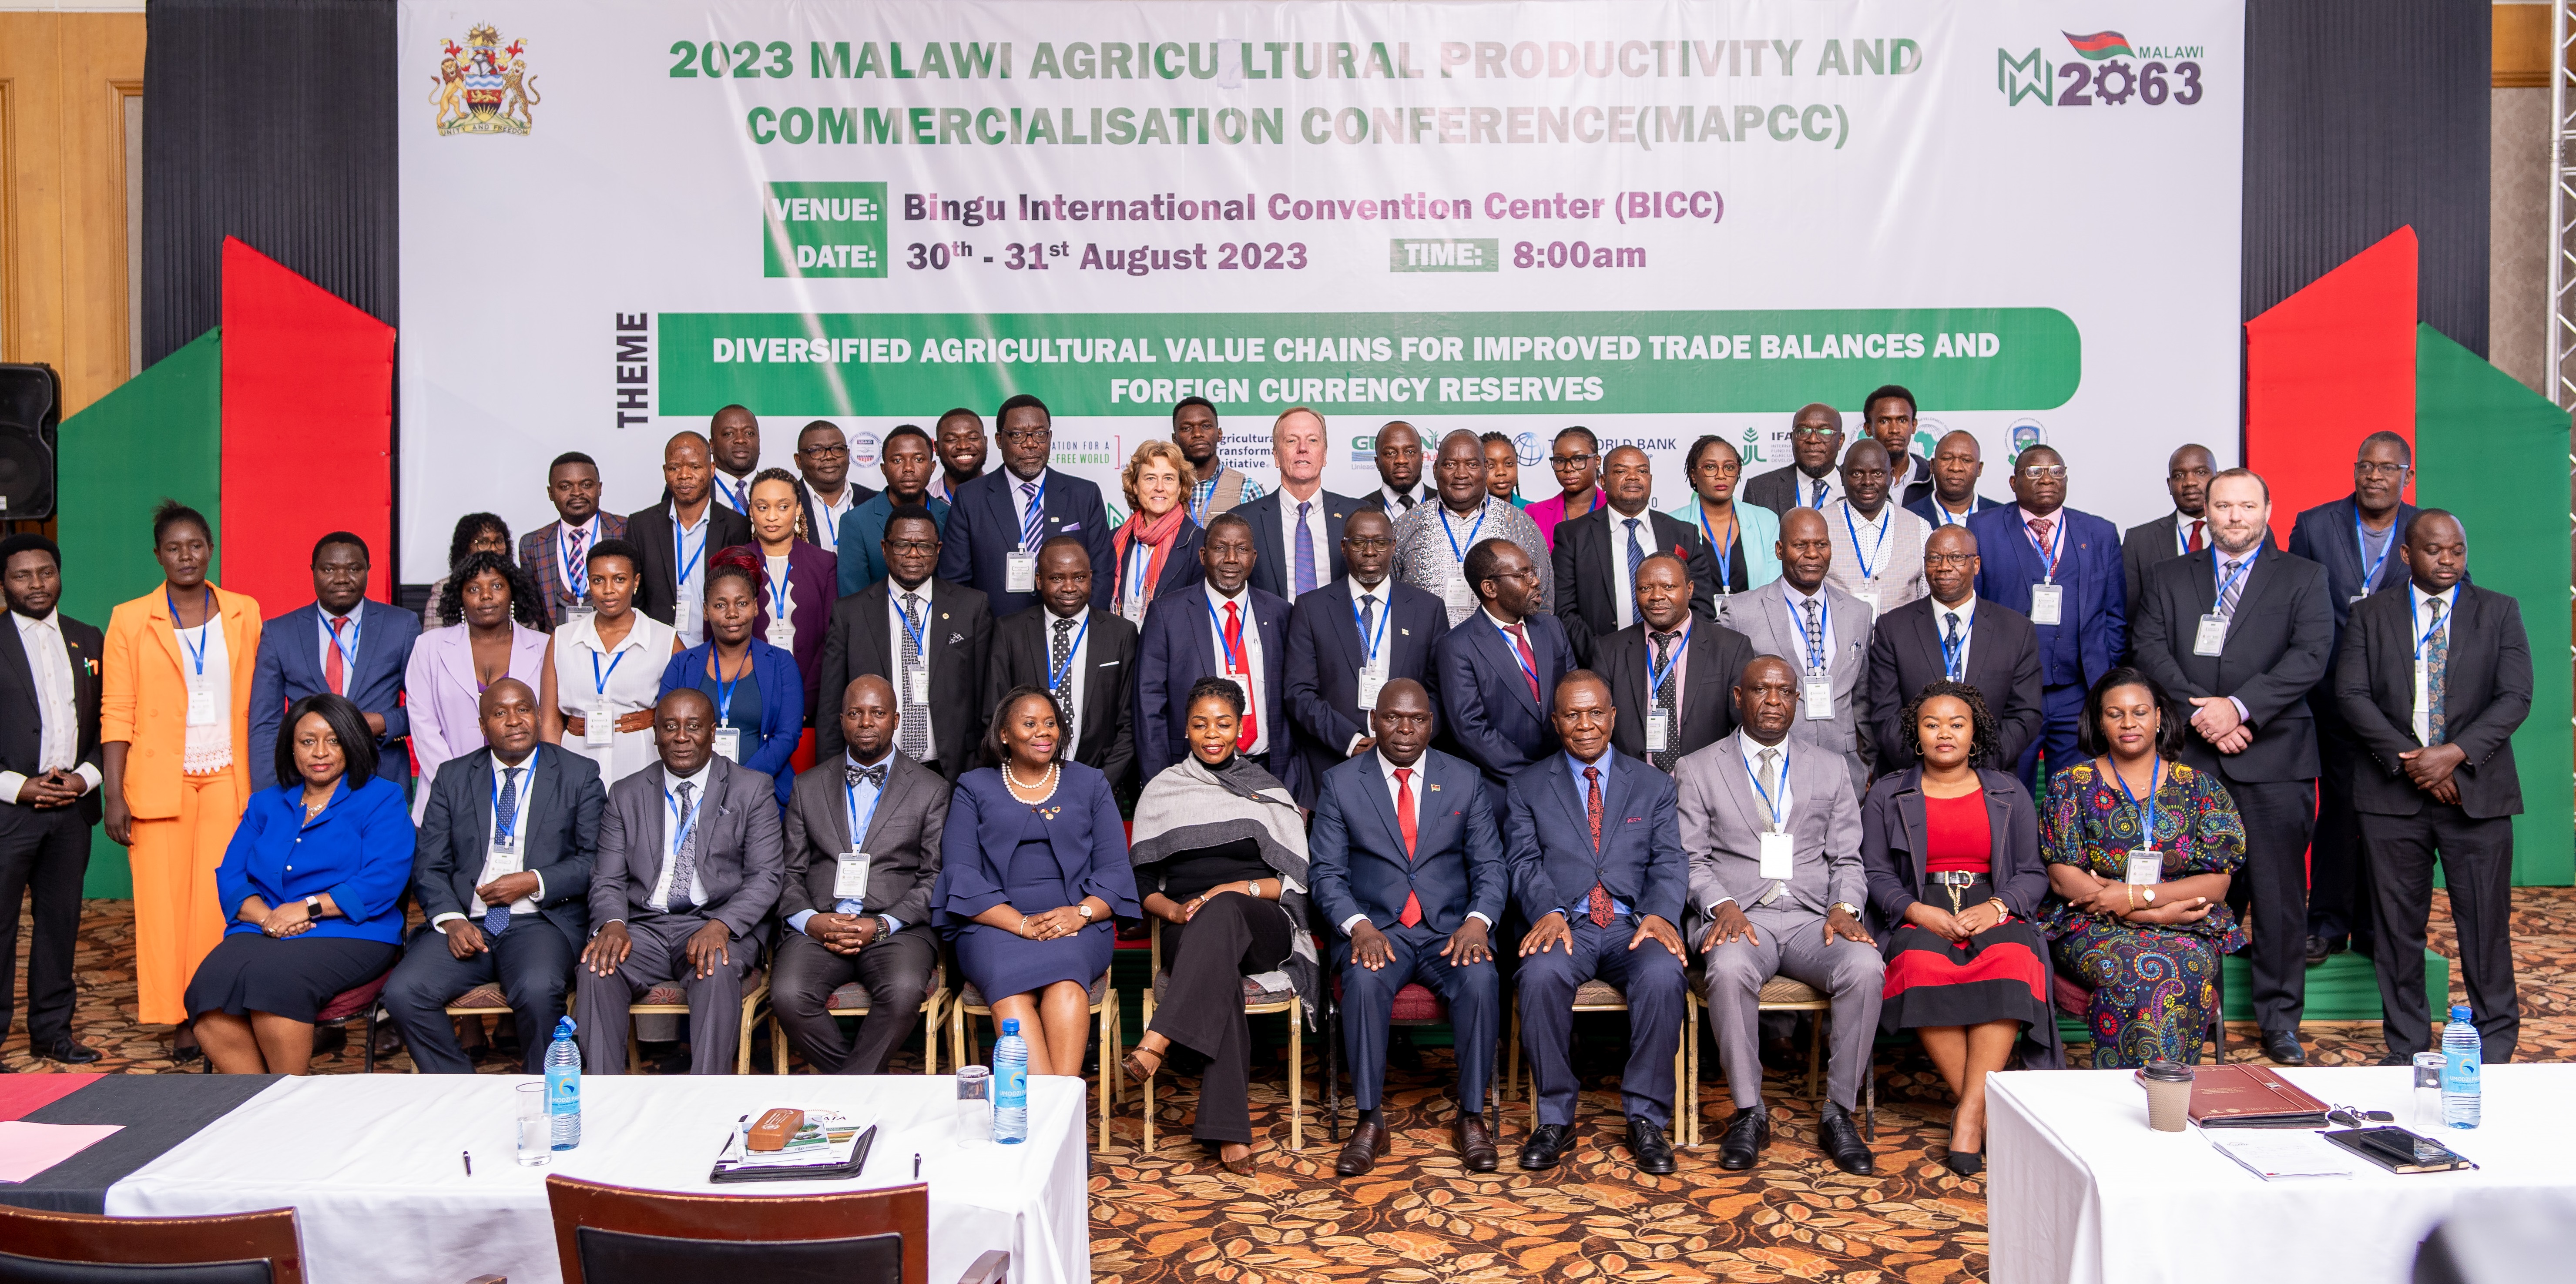 DCAFS Support the Malawi Agriculture Productivity and Commercialization Conference (MAPCC 2023)